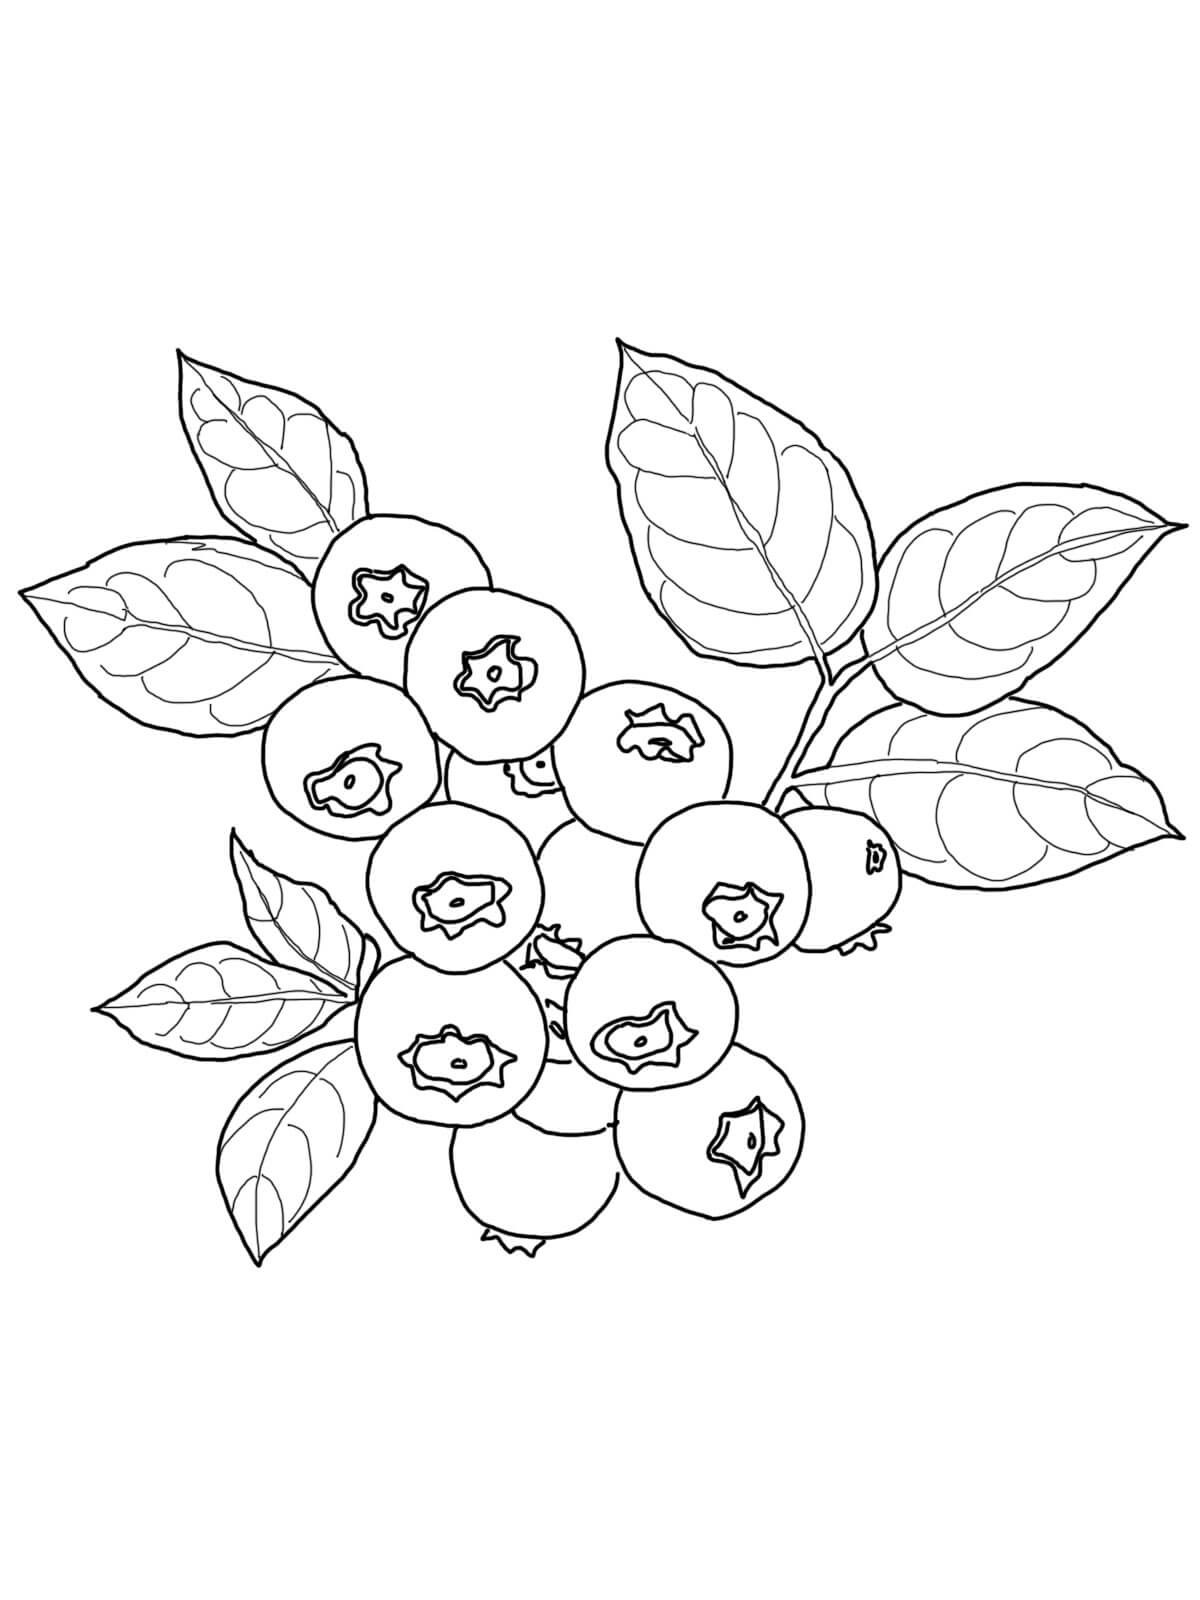 Blueberry coloring page